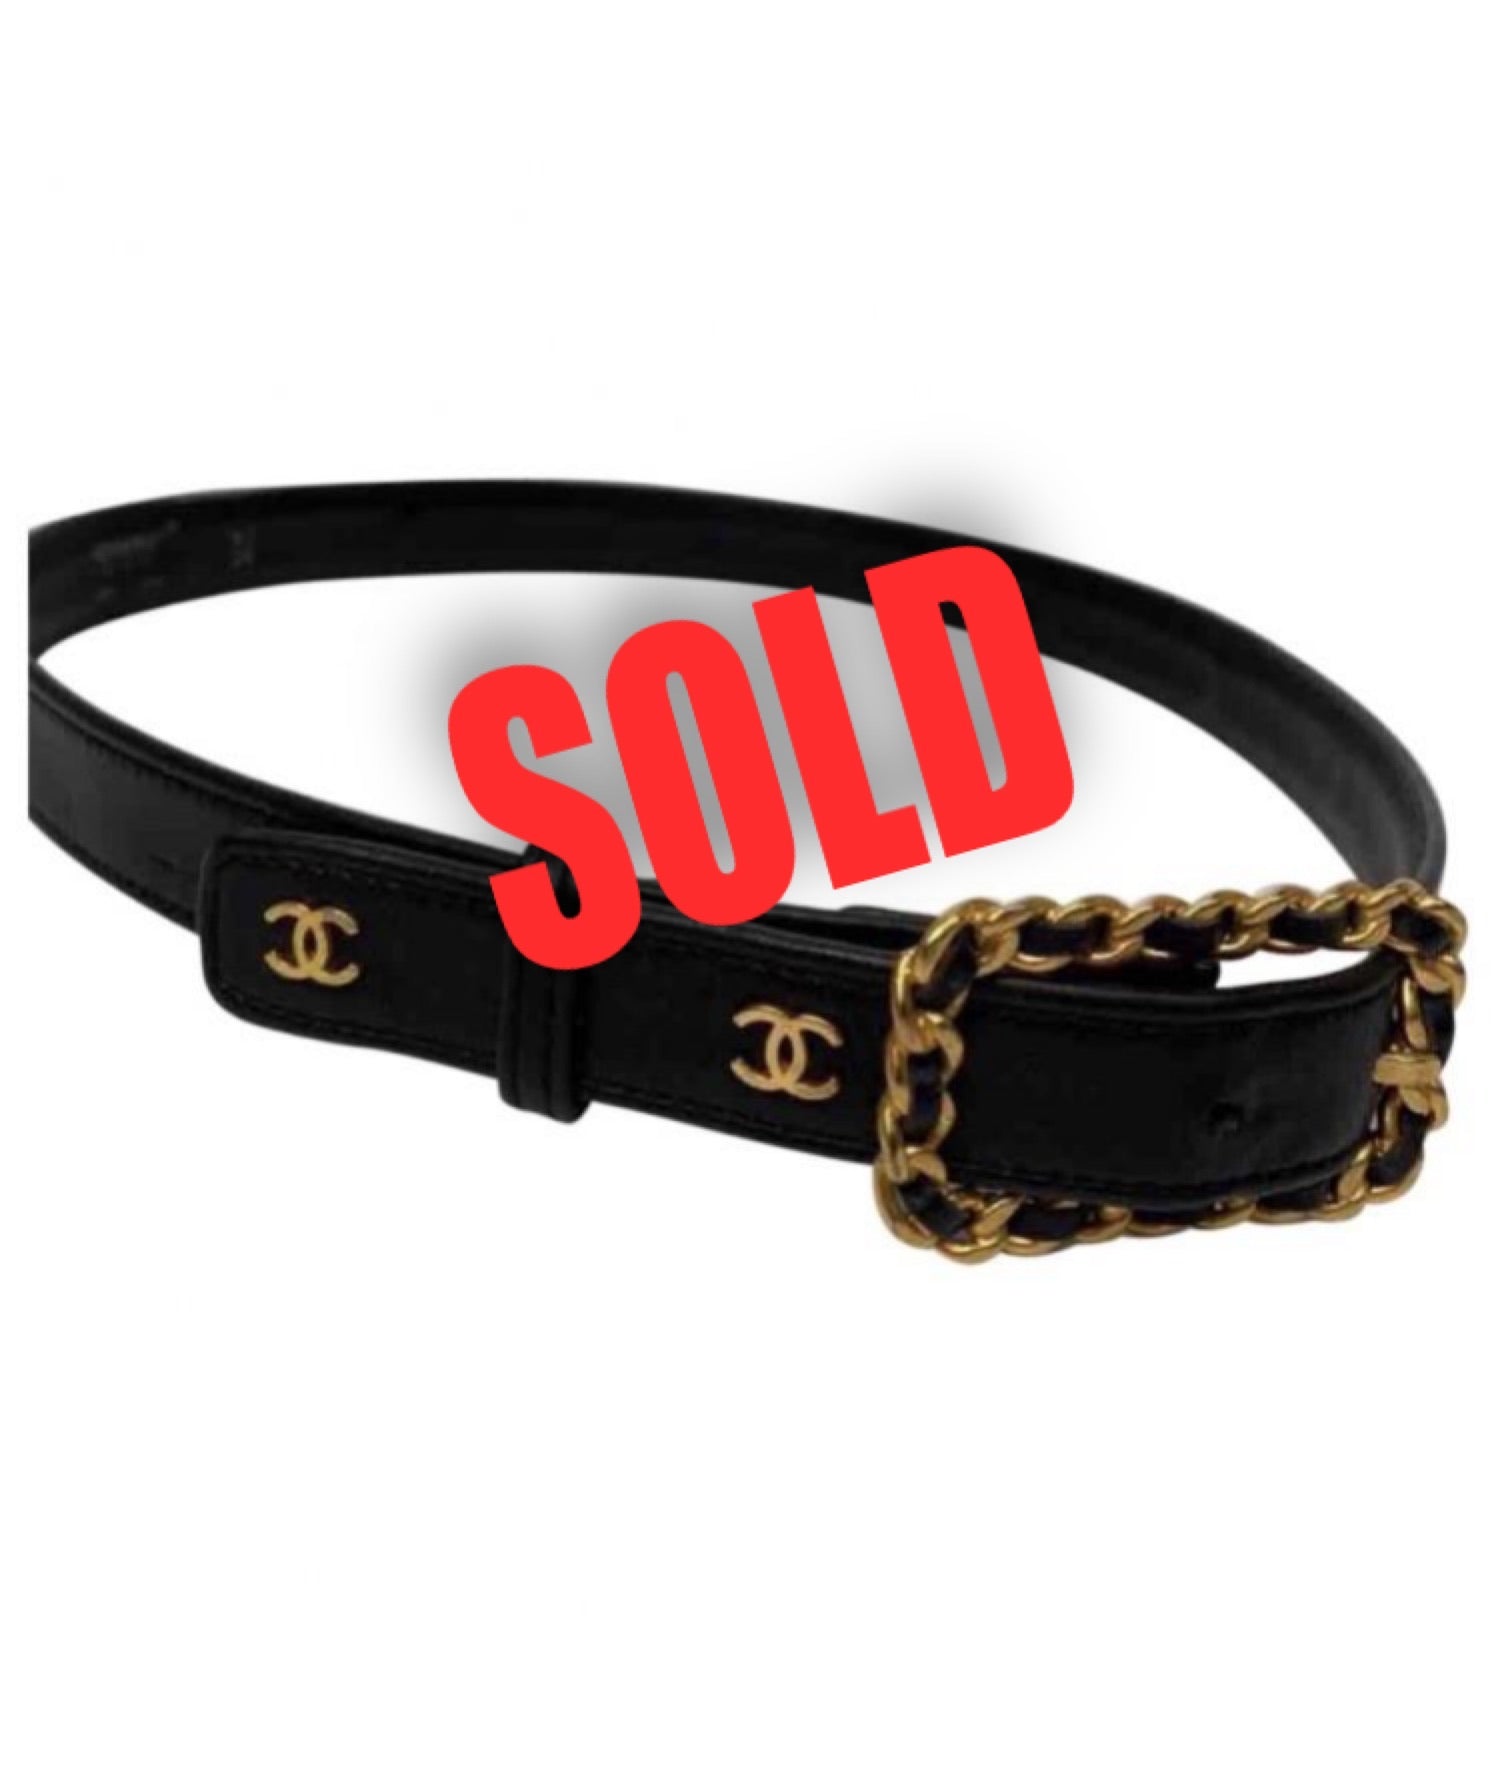 Chanel Belts & Chatelaines for Sale at Auction